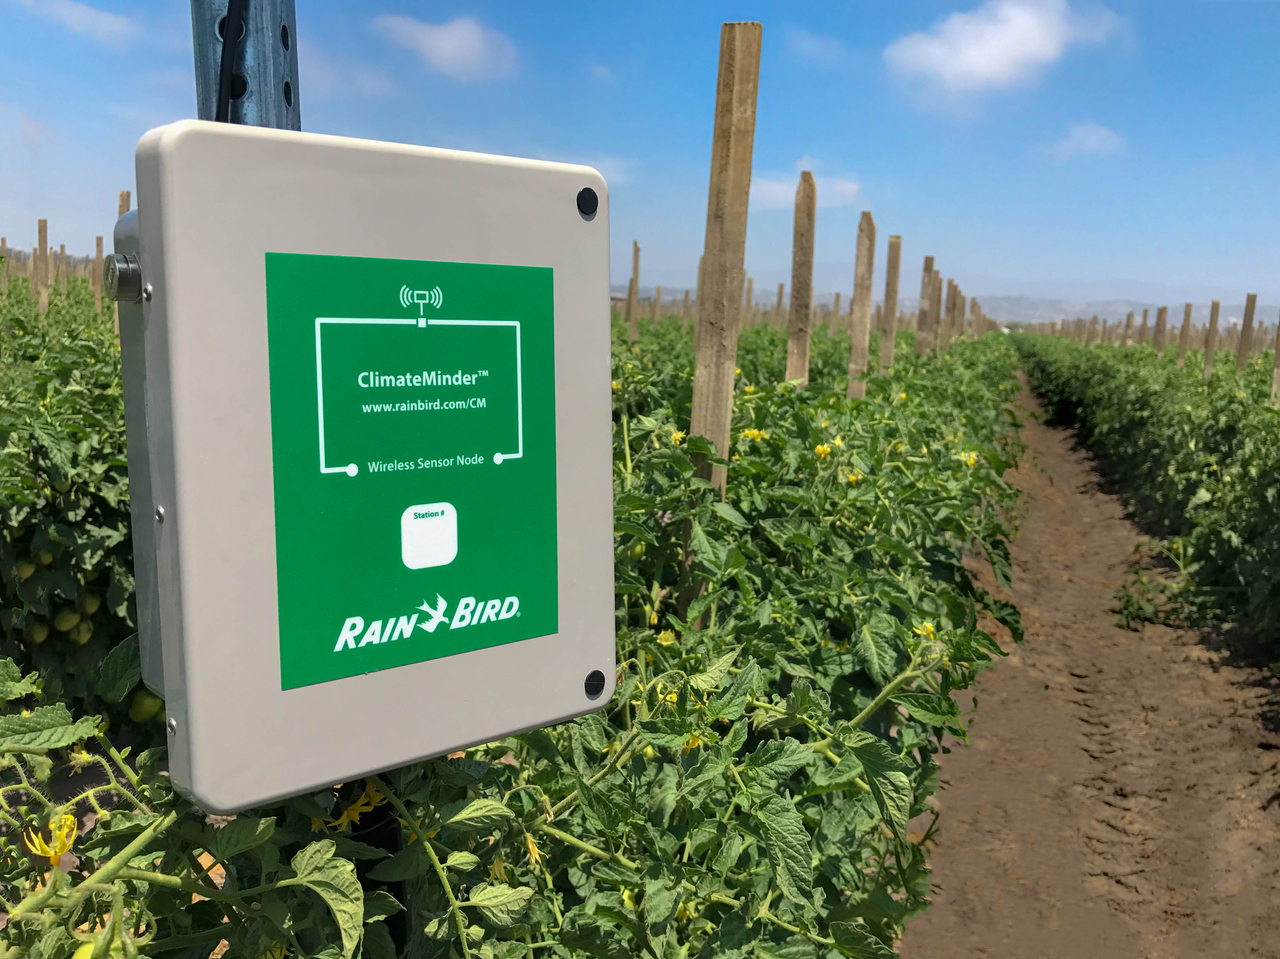 With Rain Bird Agriculture’s new entry-level ClimateMinder™ soil moisture monitoring system, growers can view their fields’ soil moisture data from any internet-enabled device.